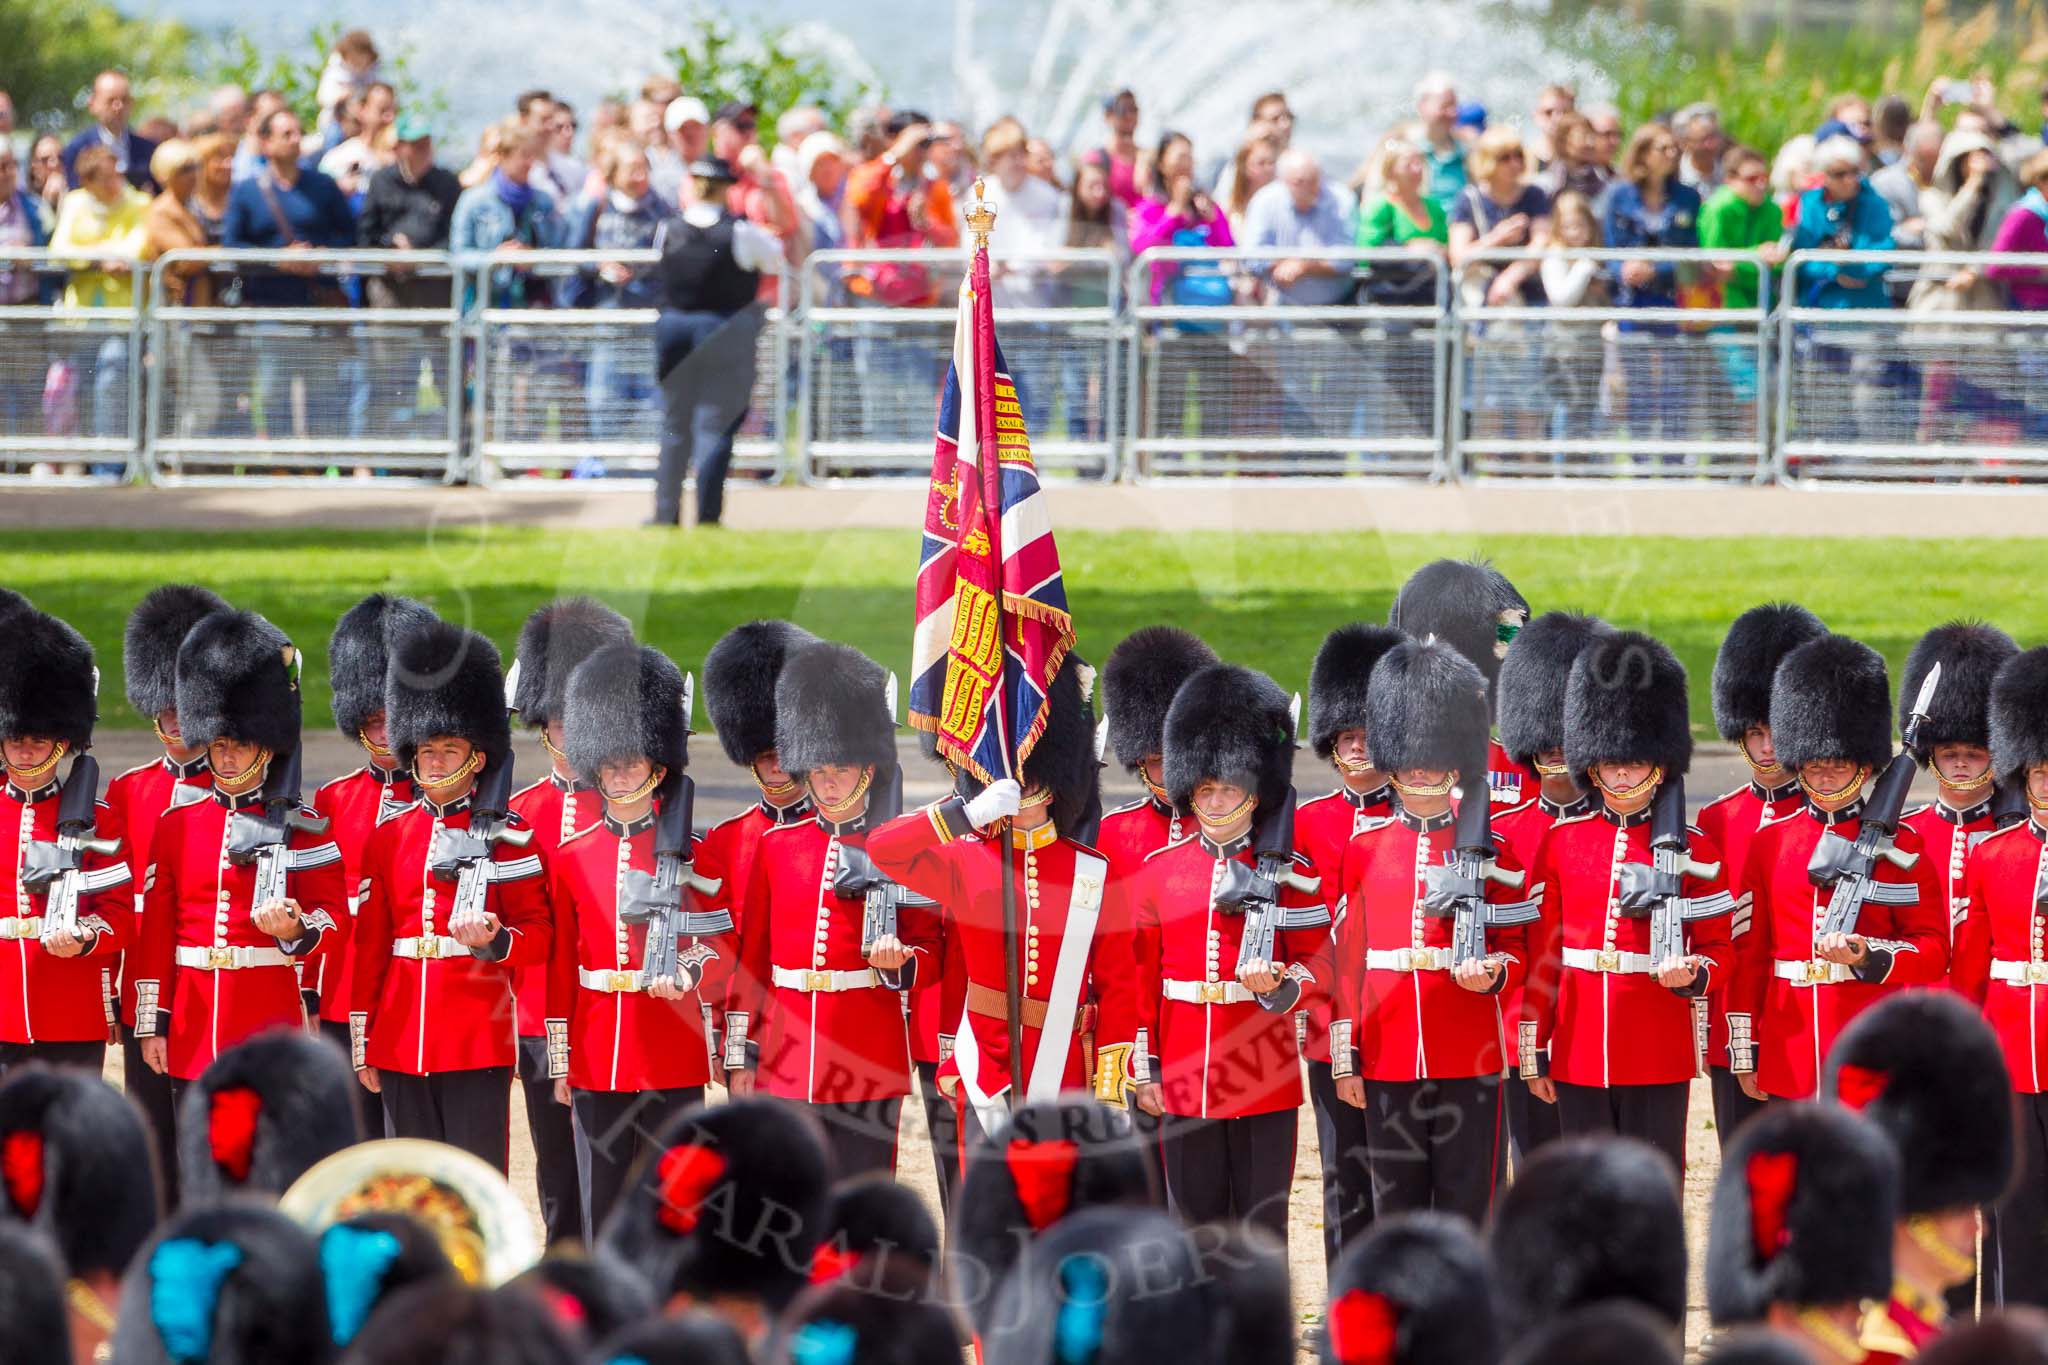 The Colonel's Review 2015.
Horse Guards Parade, Westminster,
London,

United Kingdom,
on 06 June 2015 at 11:59, image #555